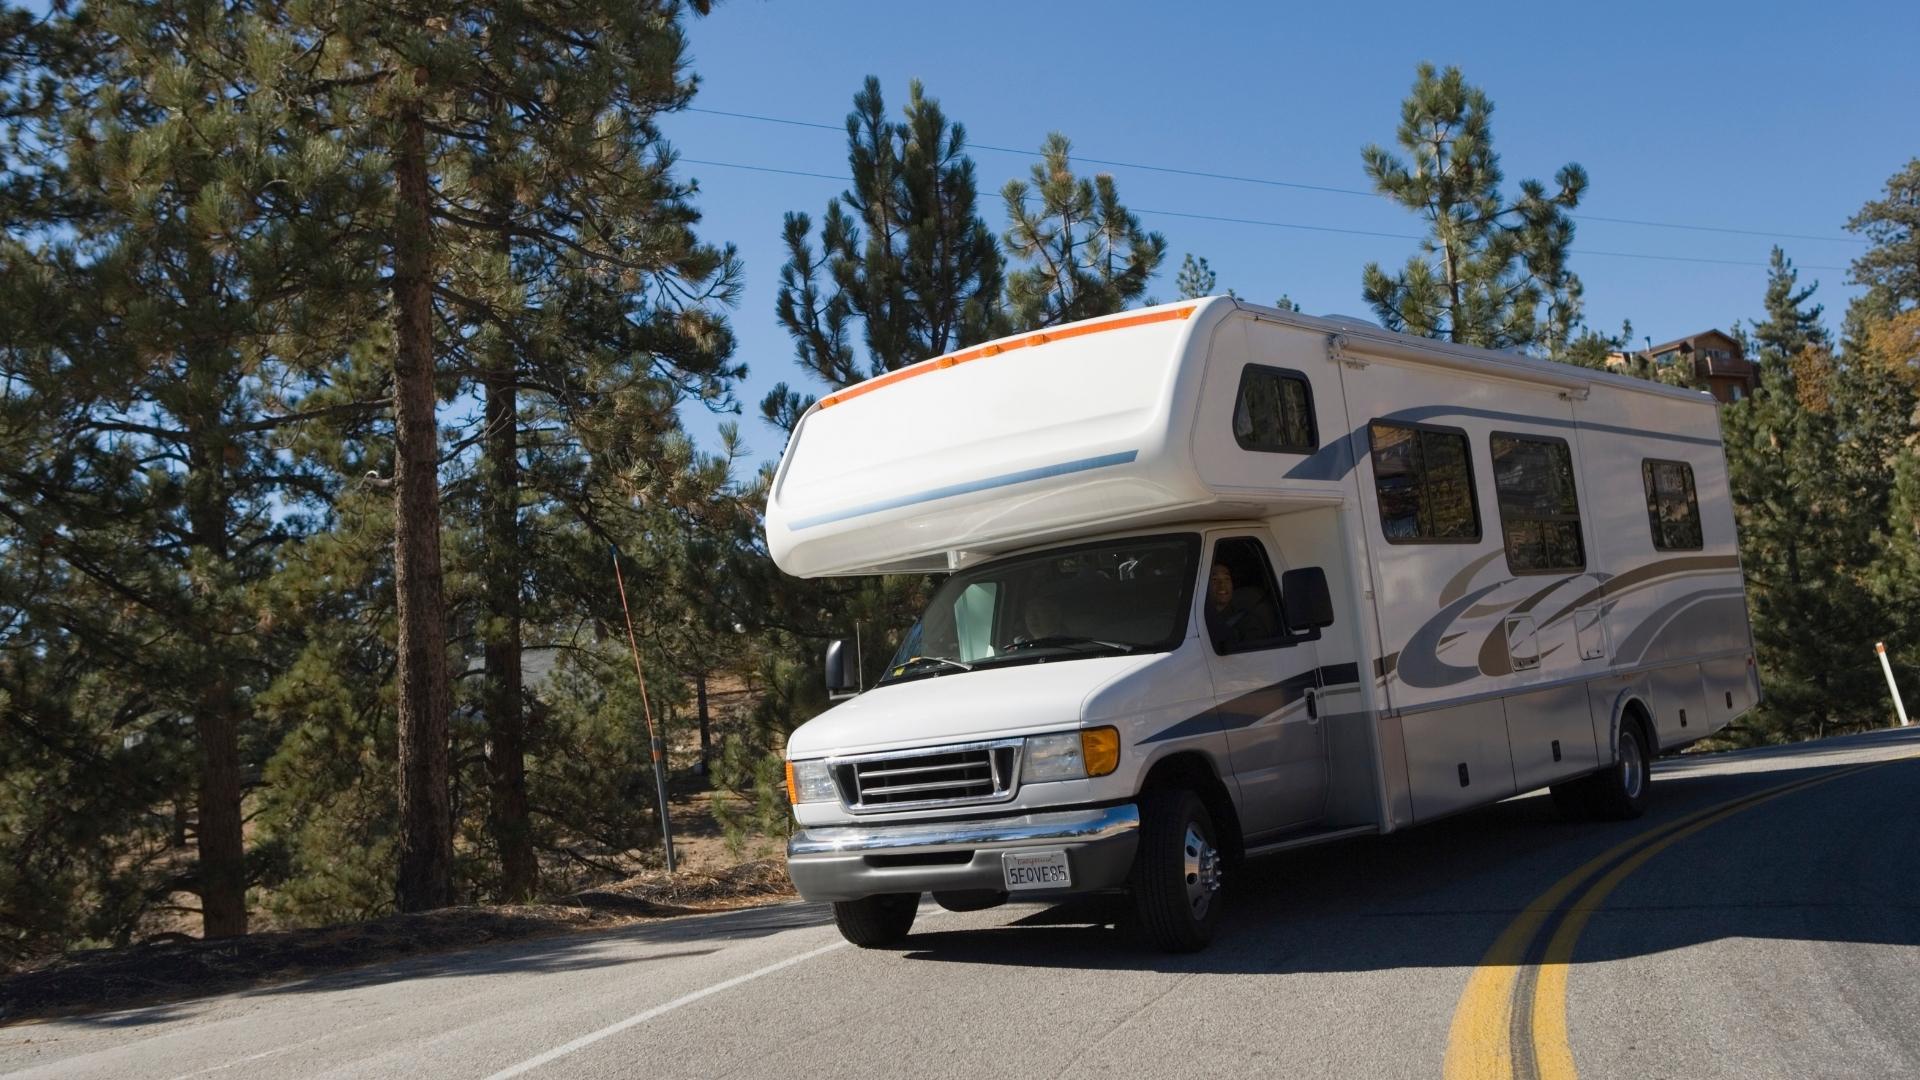 Getting out on the road and enjoying your RV